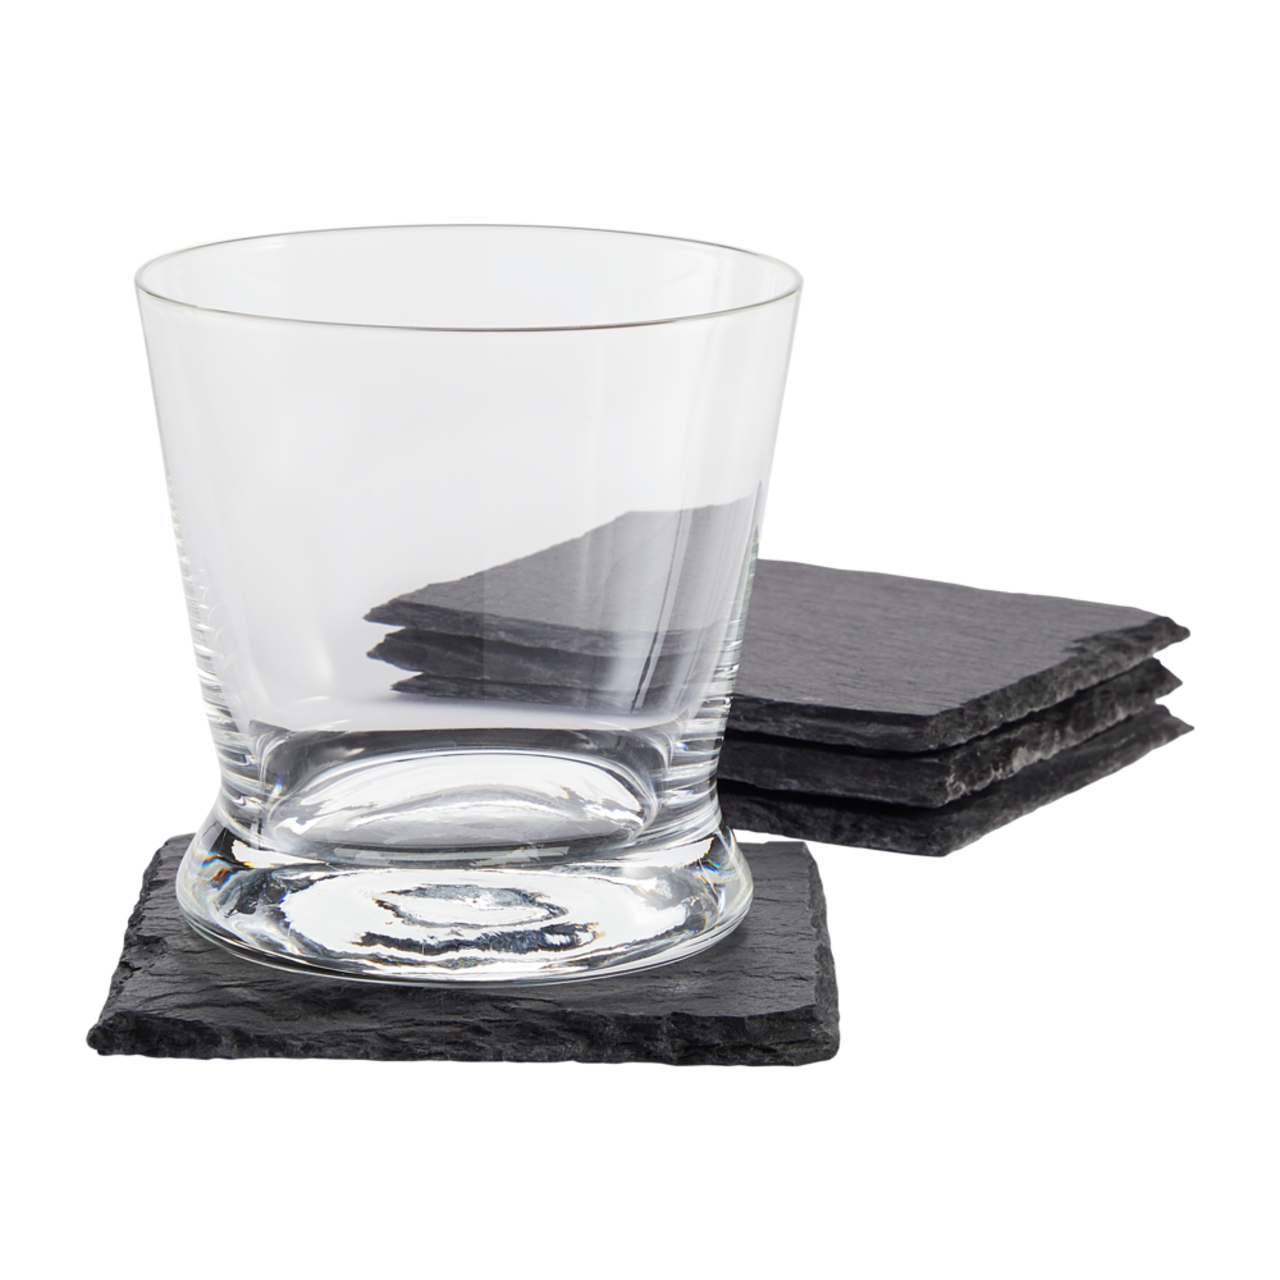 CANVAS Square Stone Slate Drink Coasters SetBlack, 3.5-in, 4-pk